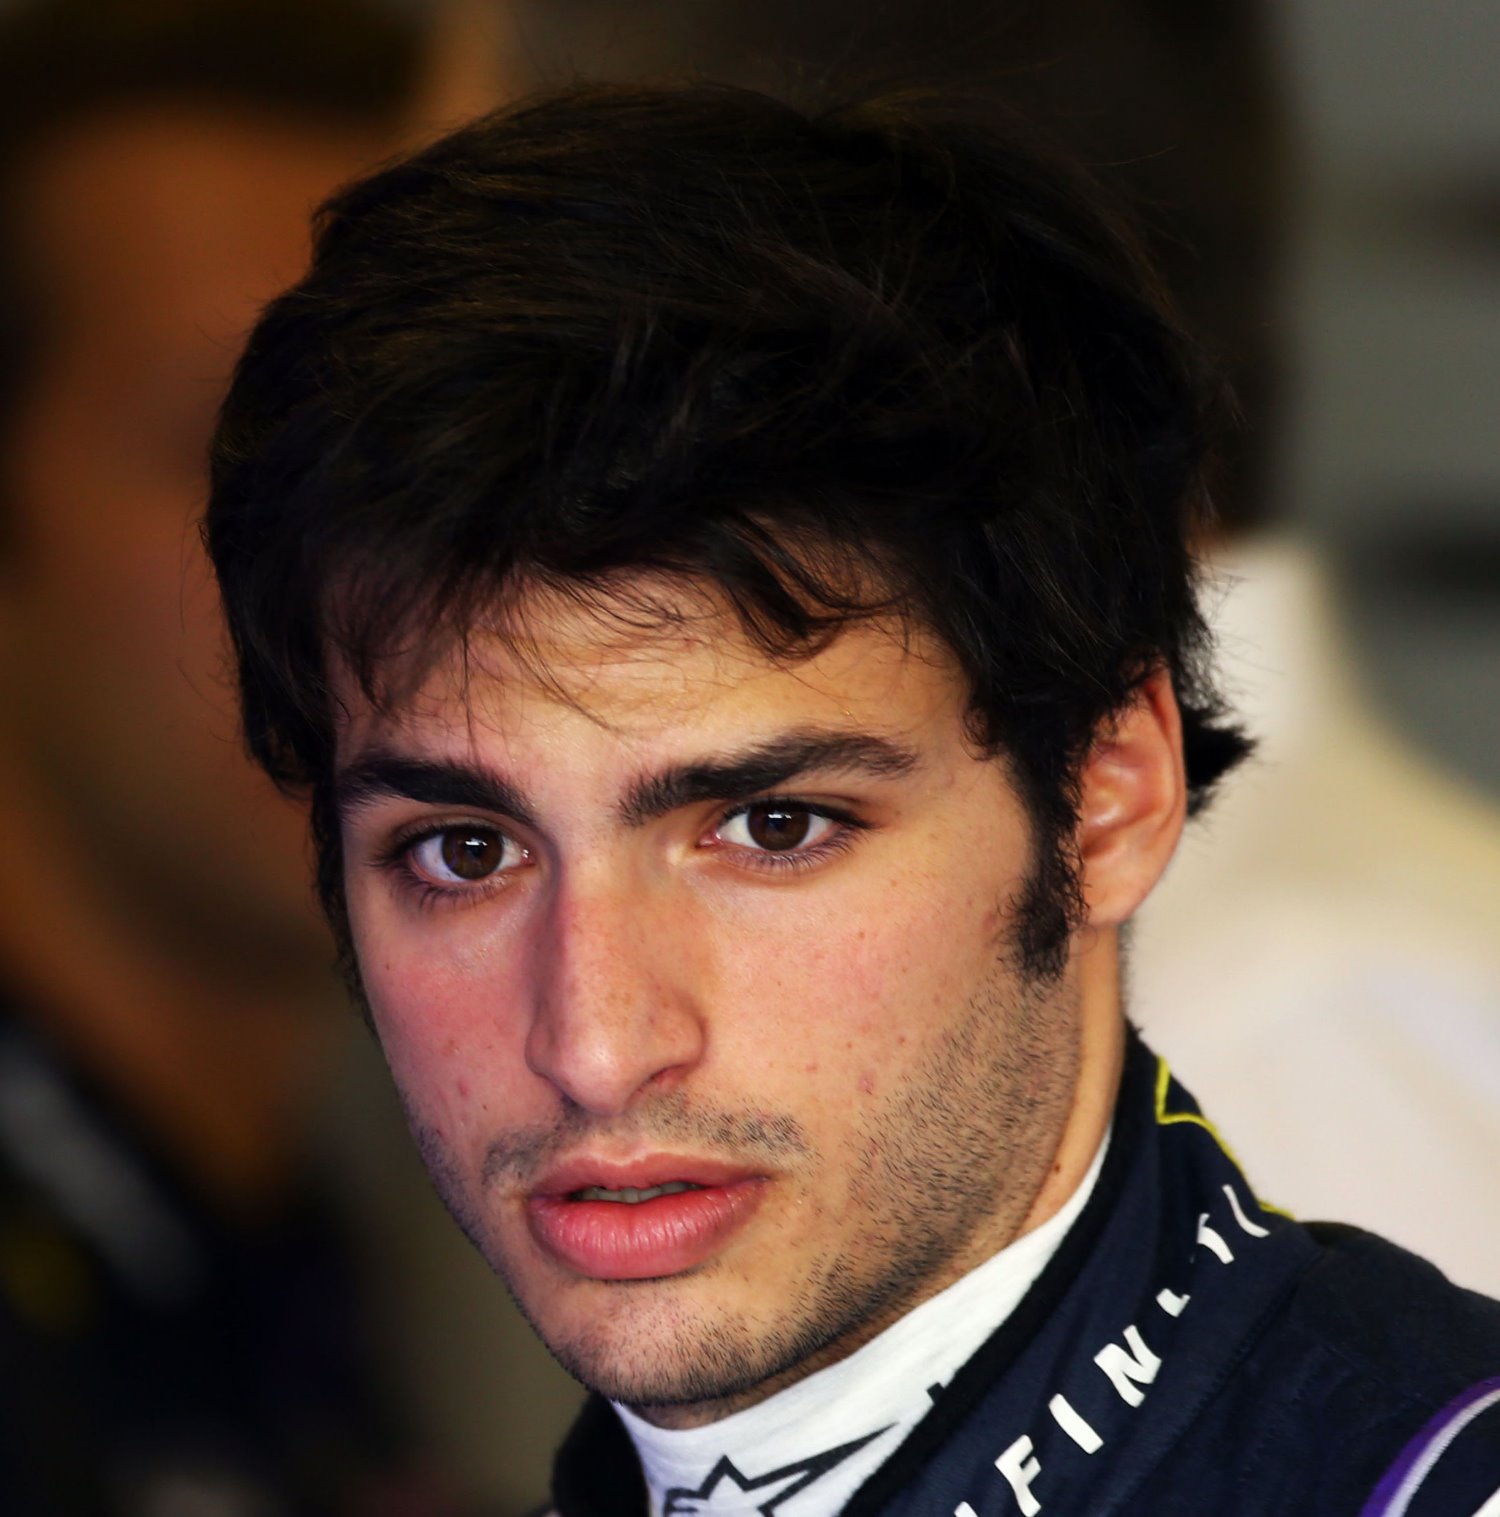 Carlos Sainz Jr. looks to be even faster than the overhyped Max Verstappen